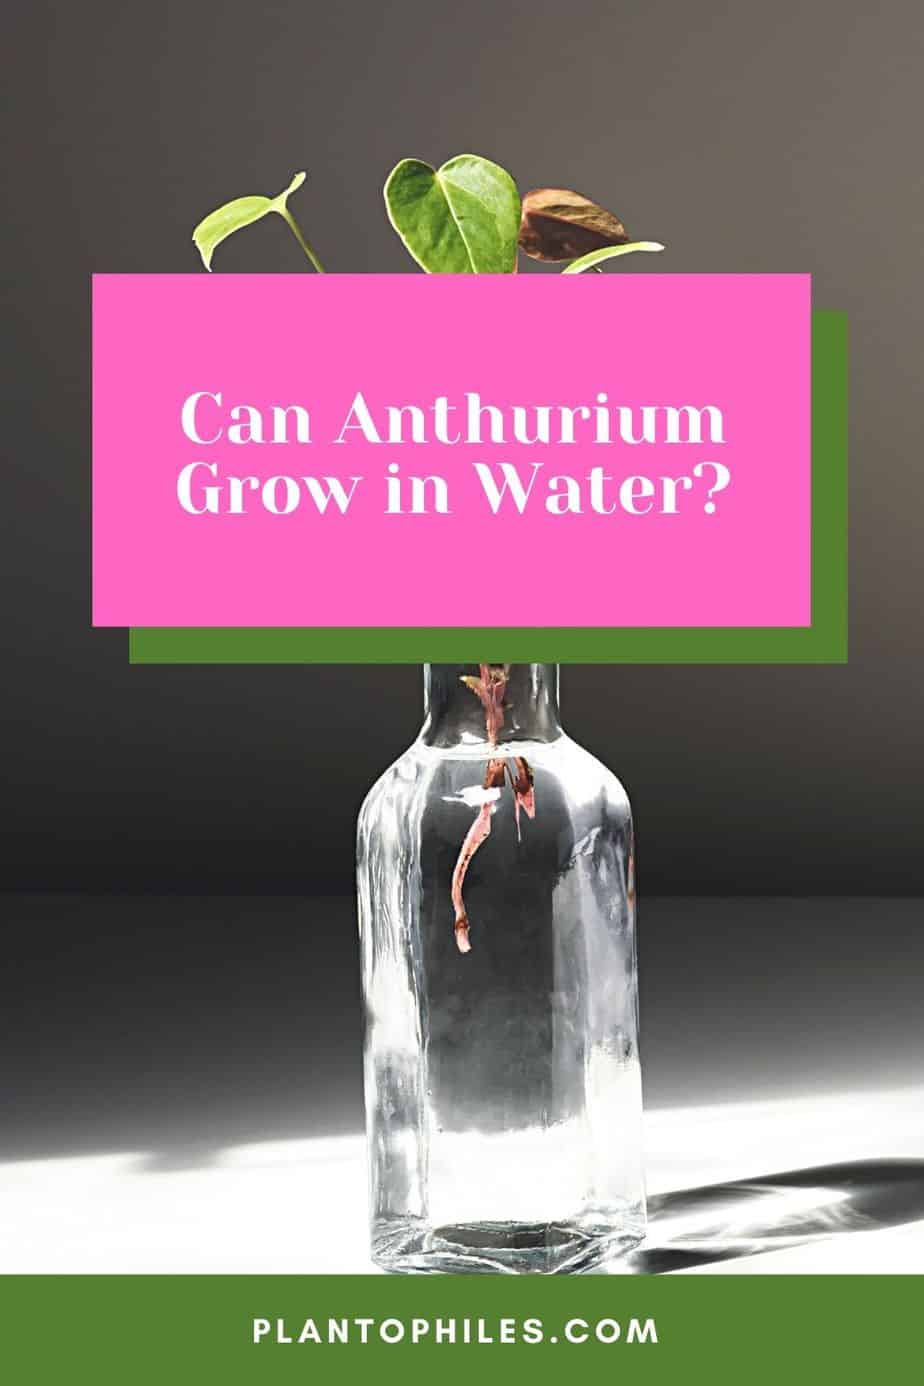 Can Anthurium Grow in Water?